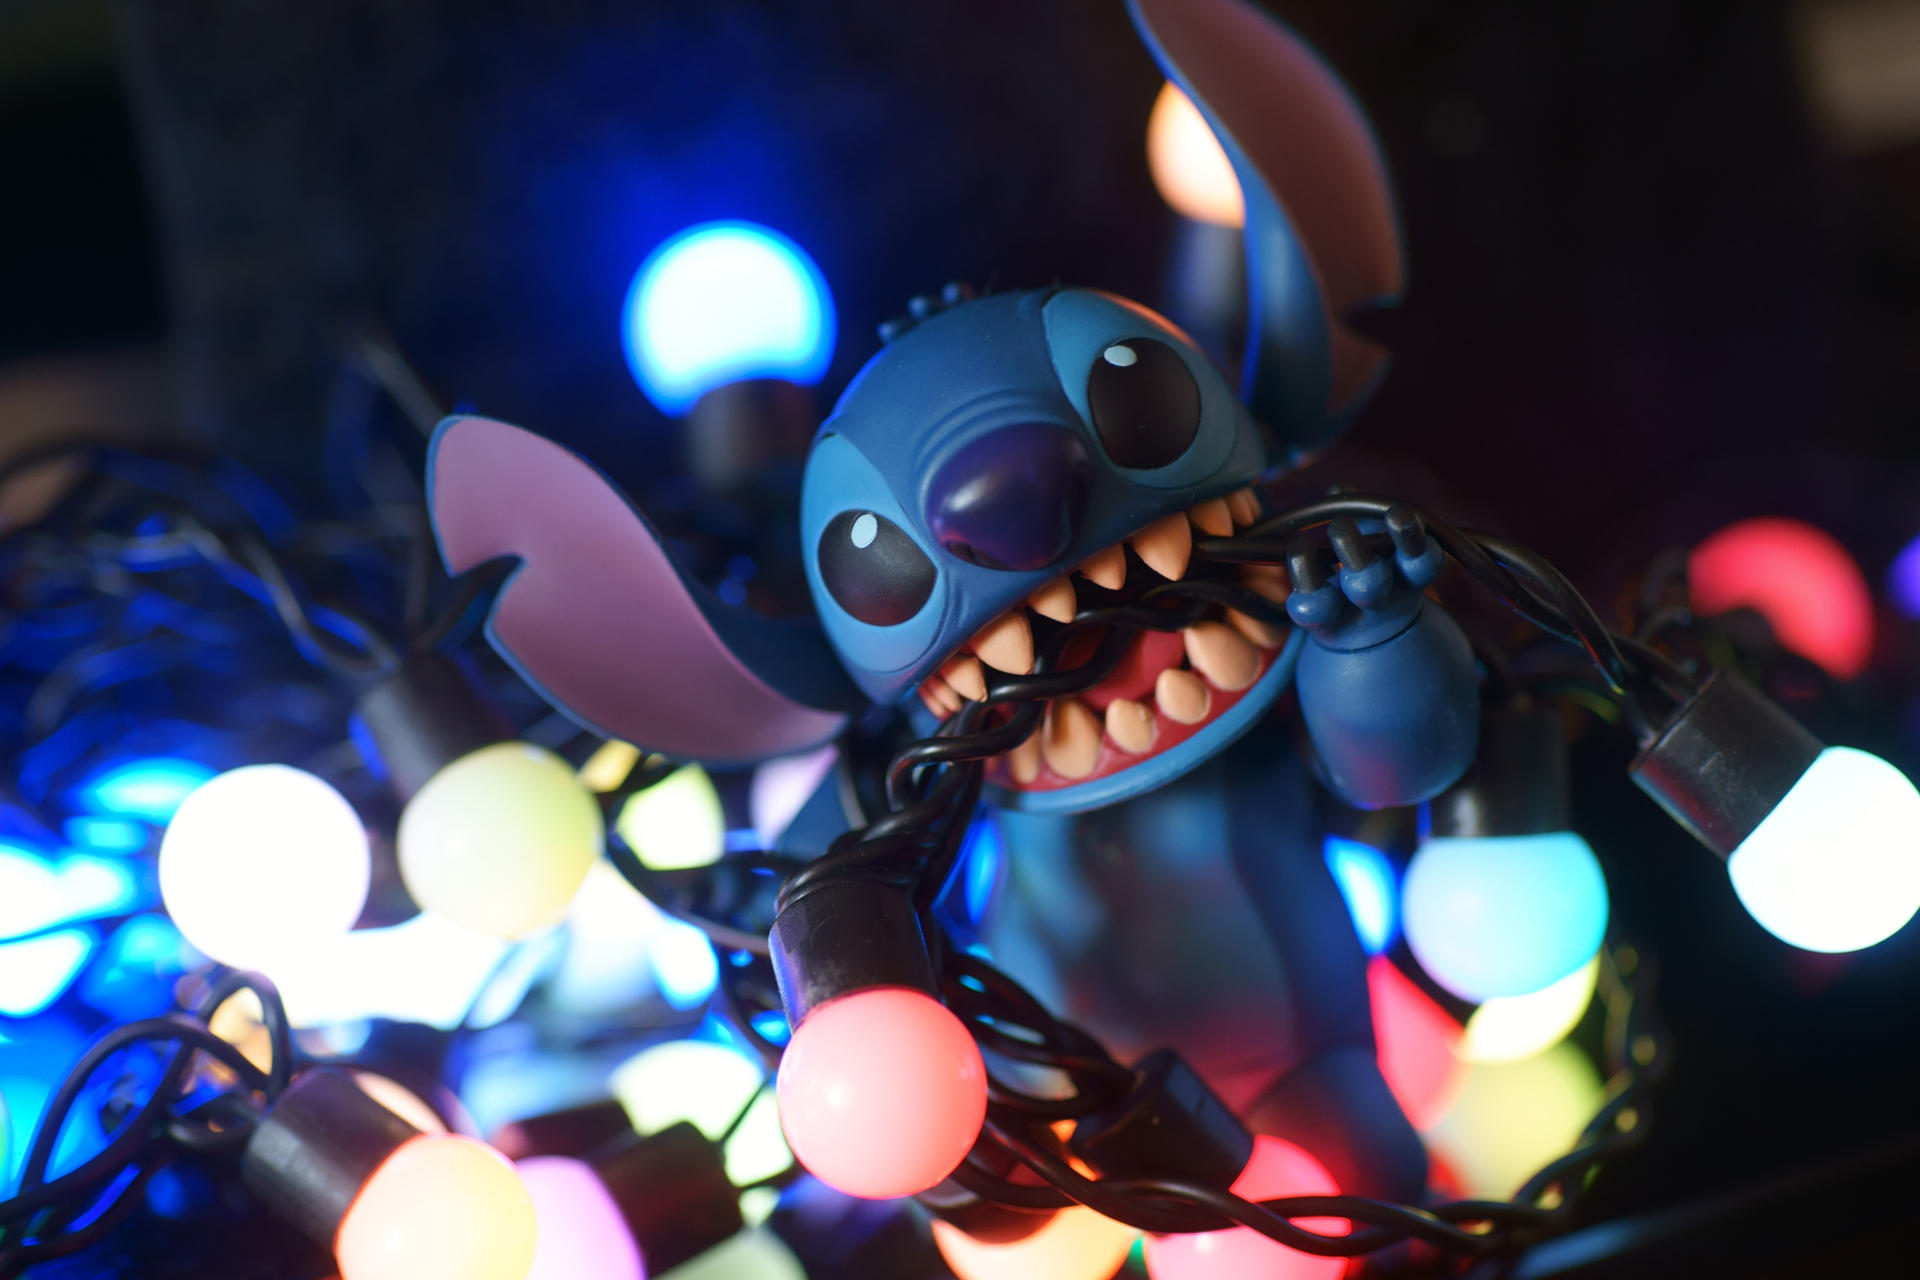 Stitch with led lamps by DTS3ds on DeviantArt